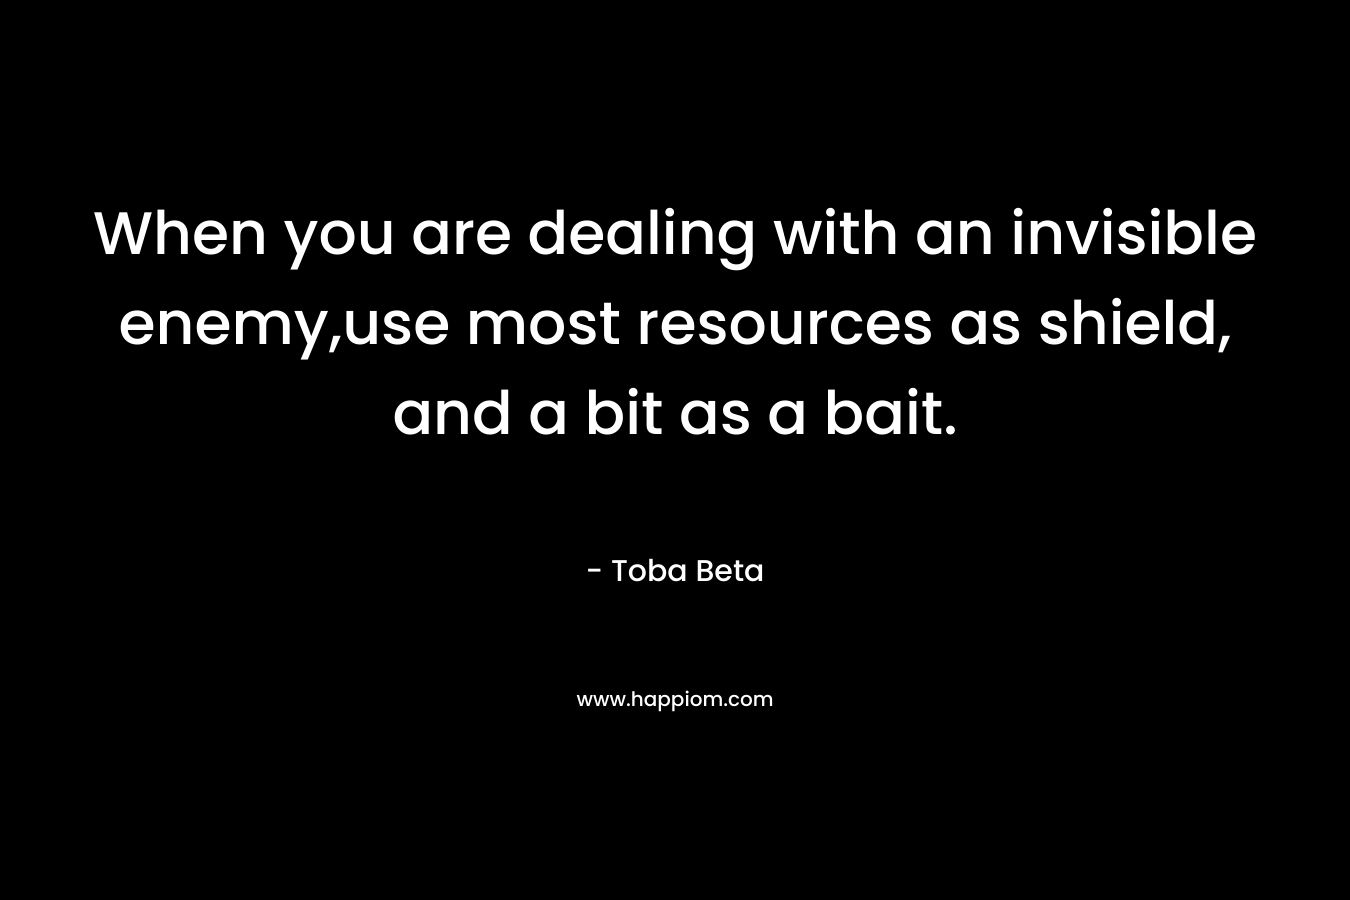 When you are dealing with an invisible enemy,use most resources as shield, and a bit as a bait.